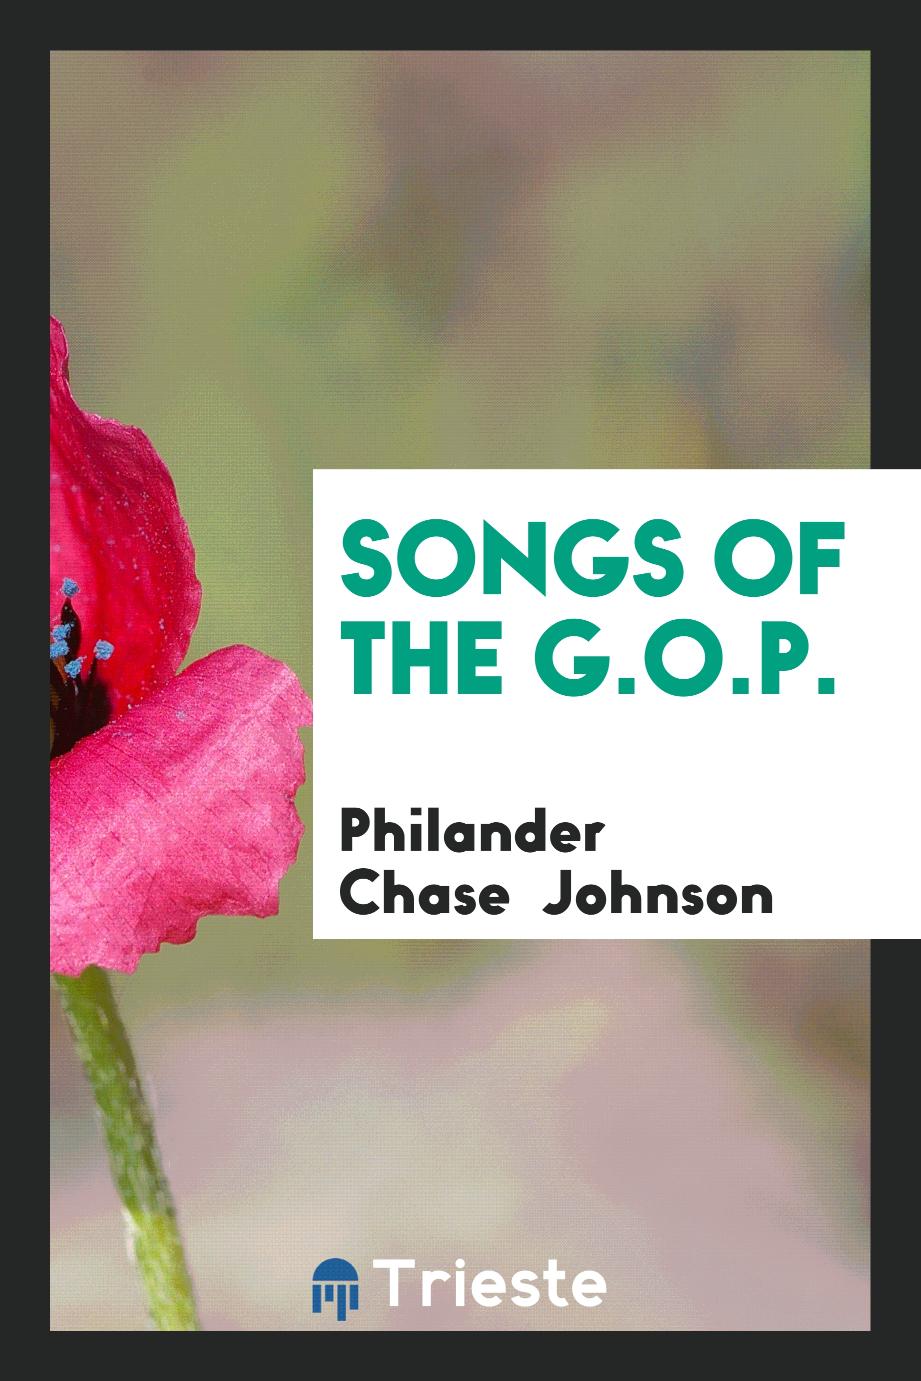 Songs of the G.O.P.